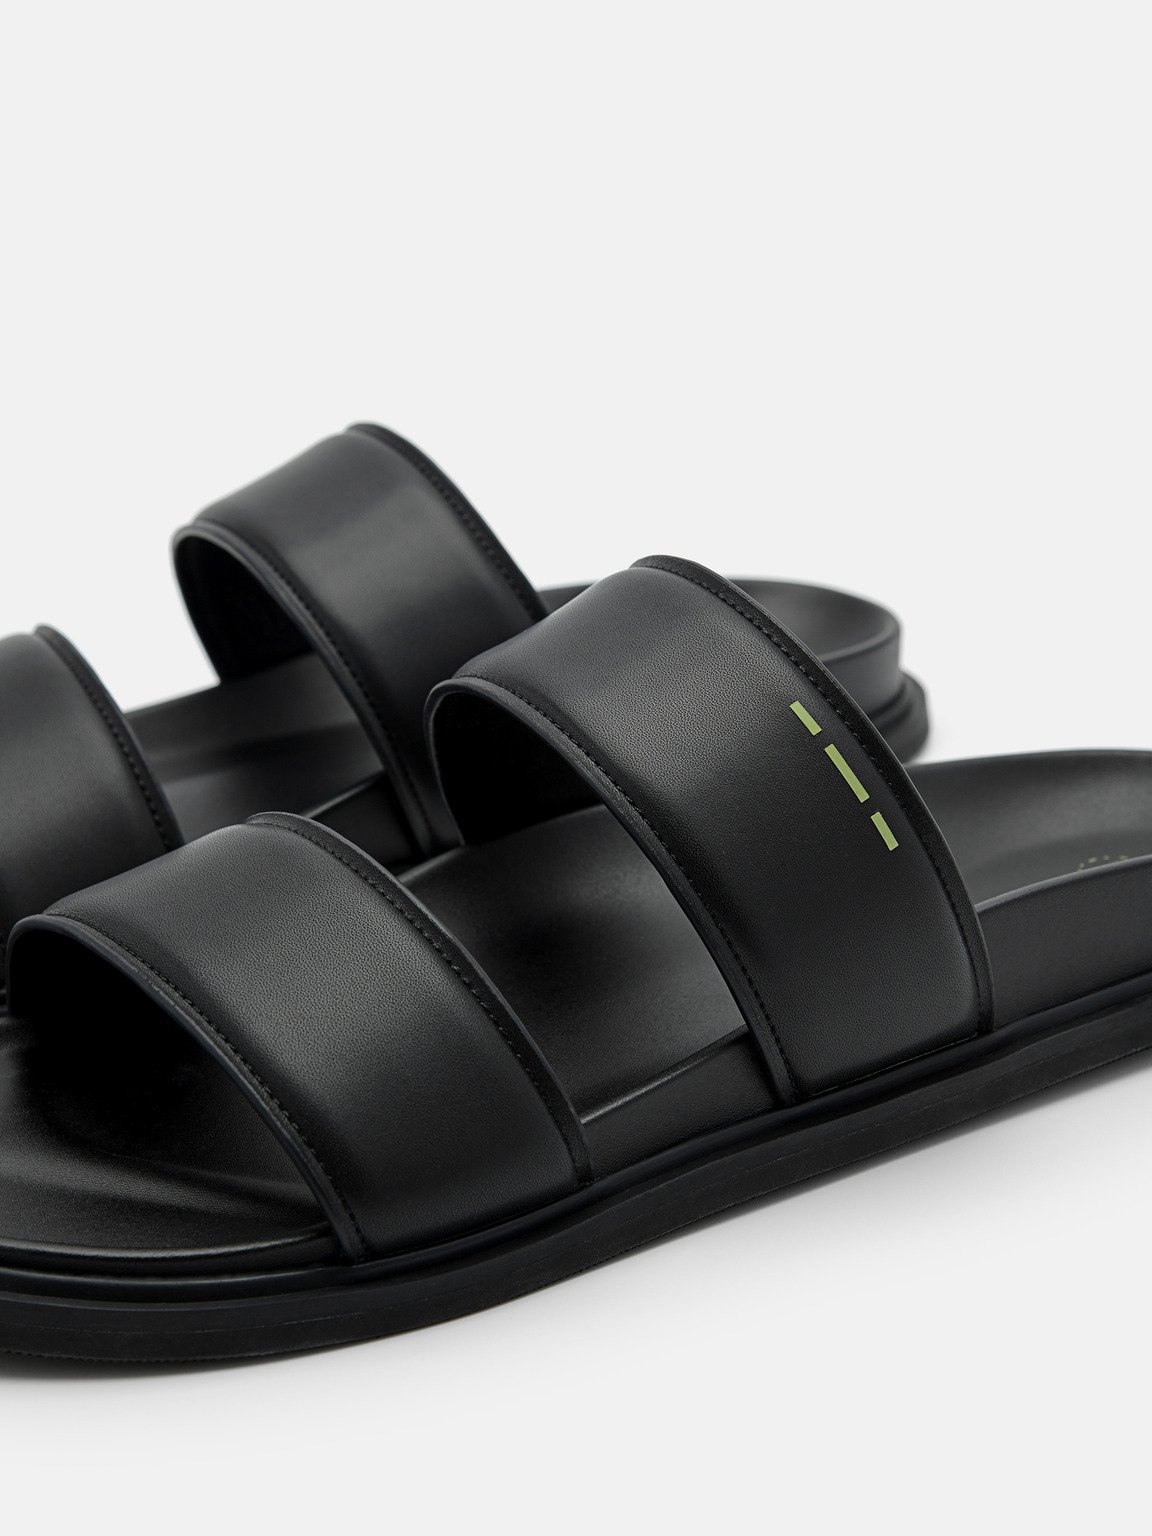 Men's rePEDRO Recycled Leather Slide Sandals, Black